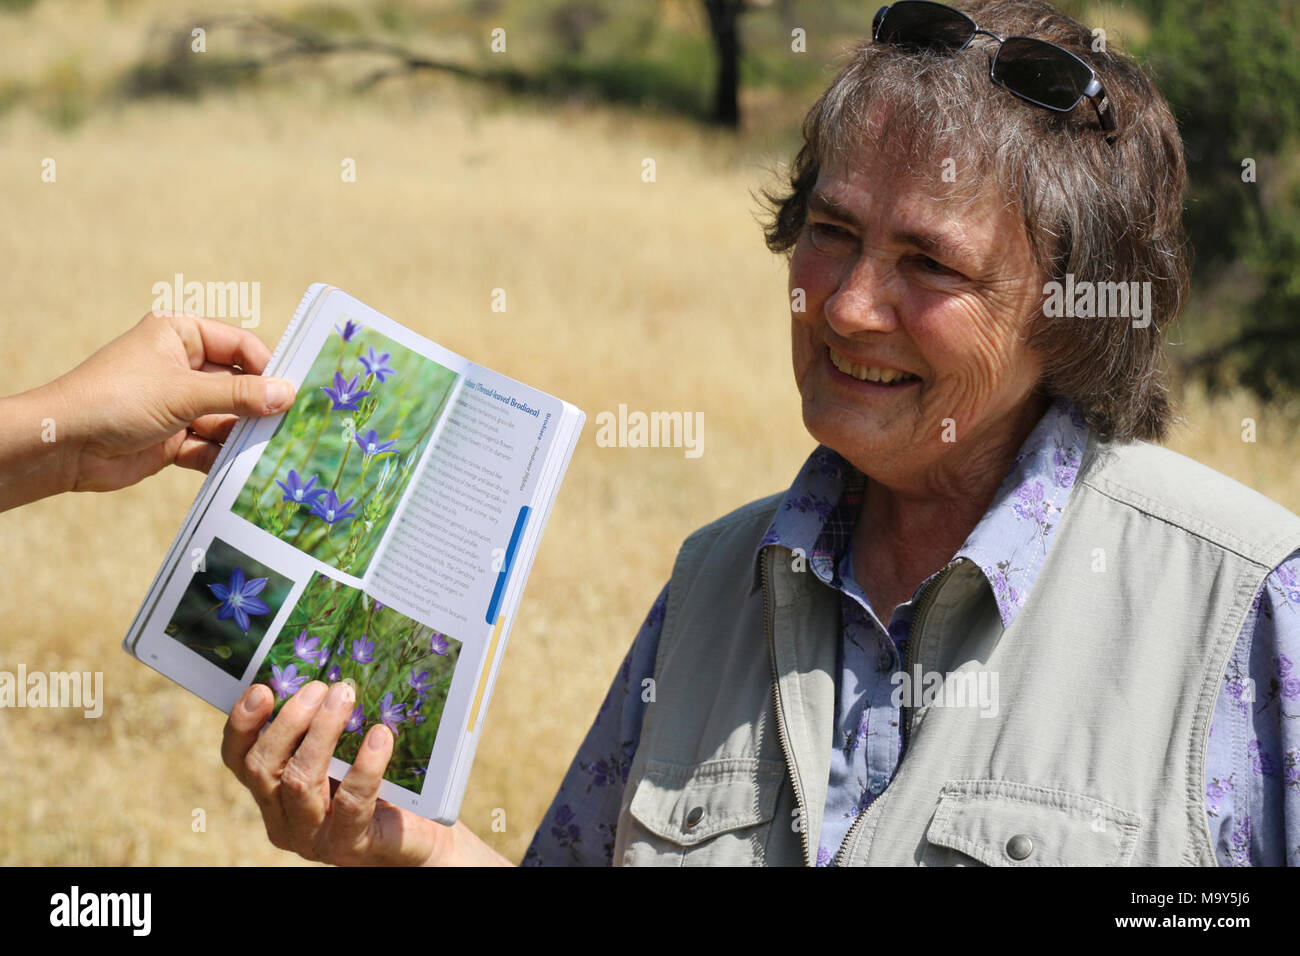 Ann Croissant founded the Glendora Community Conservancy, which preserves the. Stock Photo